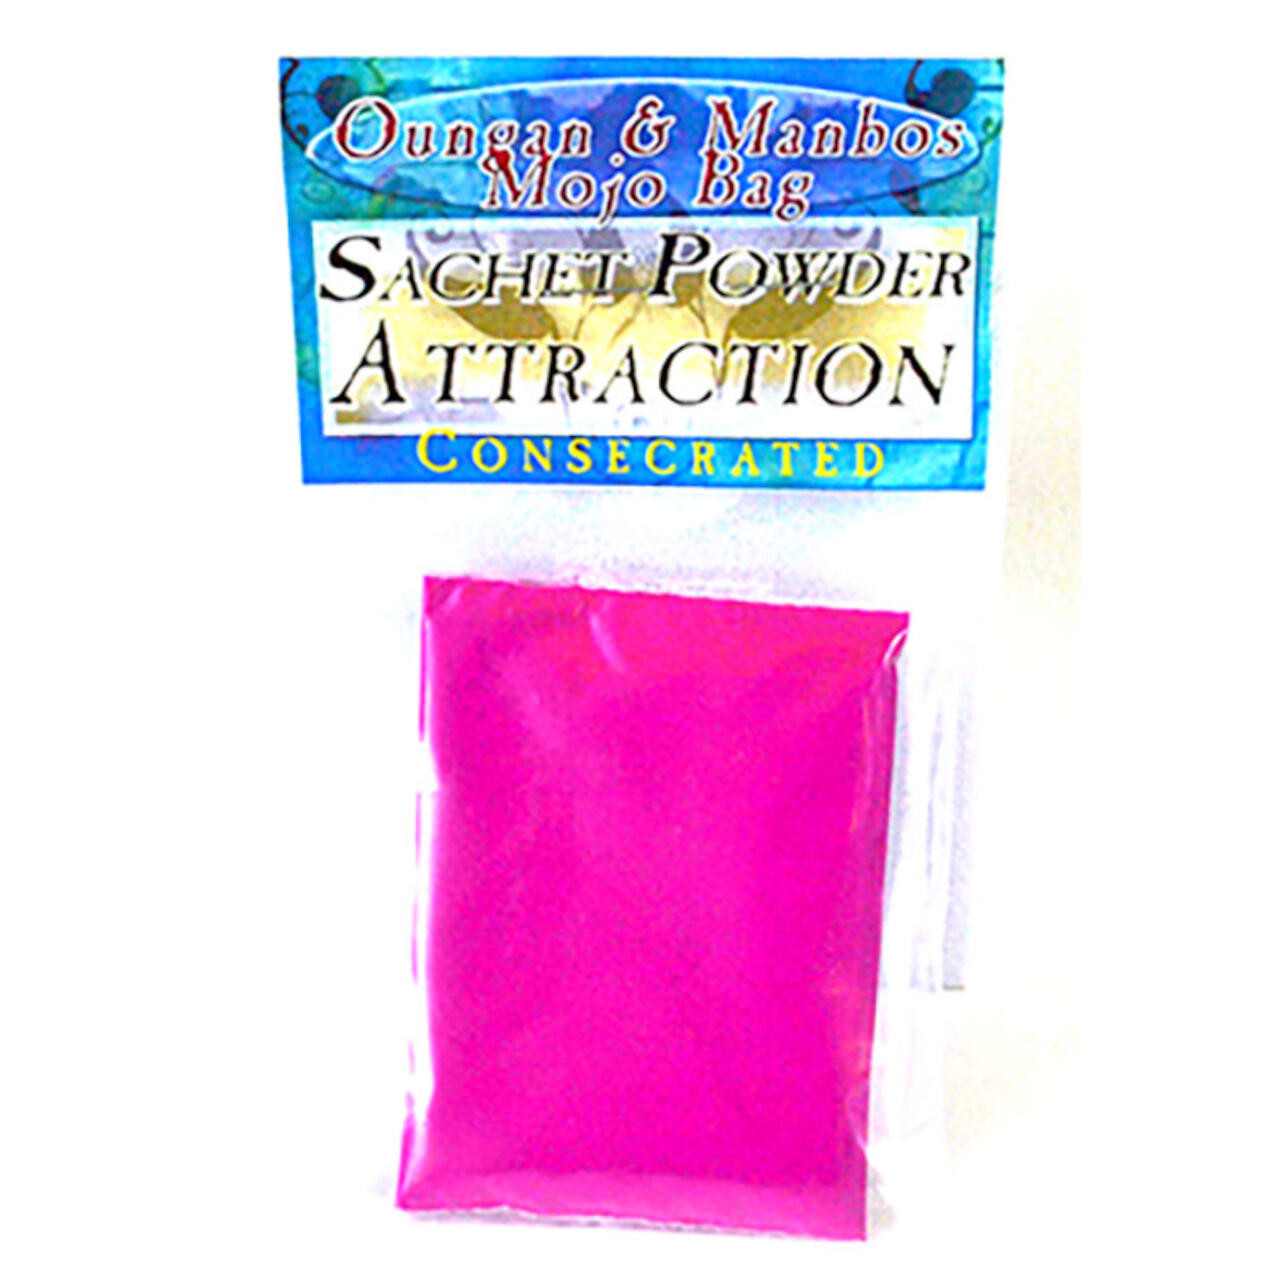 Attraction Sachet Powder Consecrated .5 oz